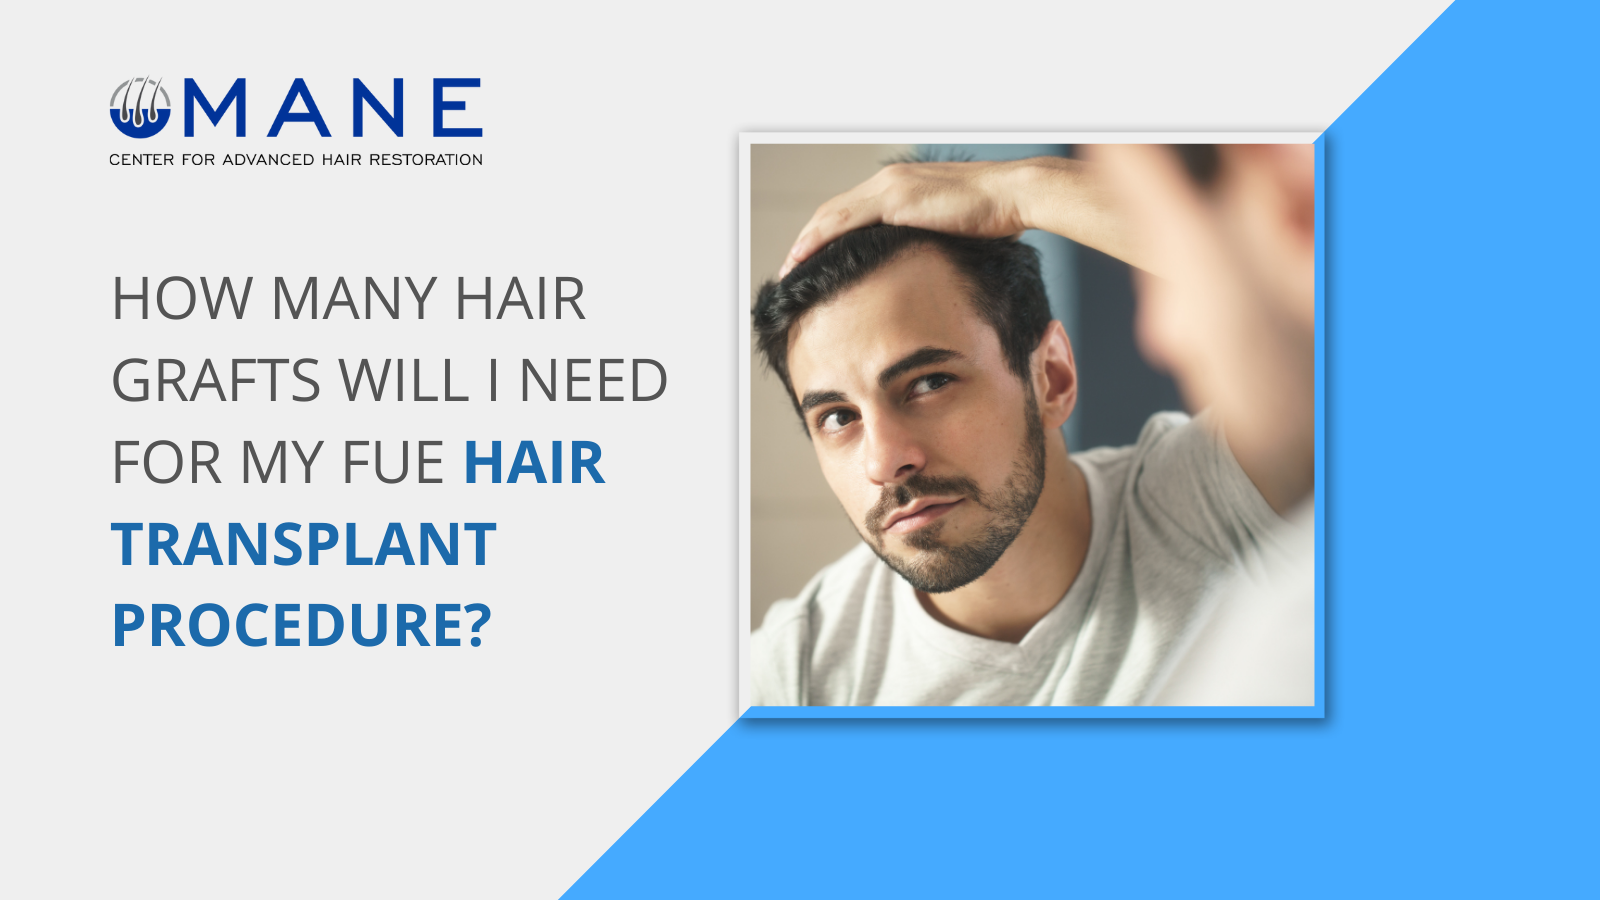 How Many Hair Grafts Will I Need for My FUE Hair Transplant Procedure?